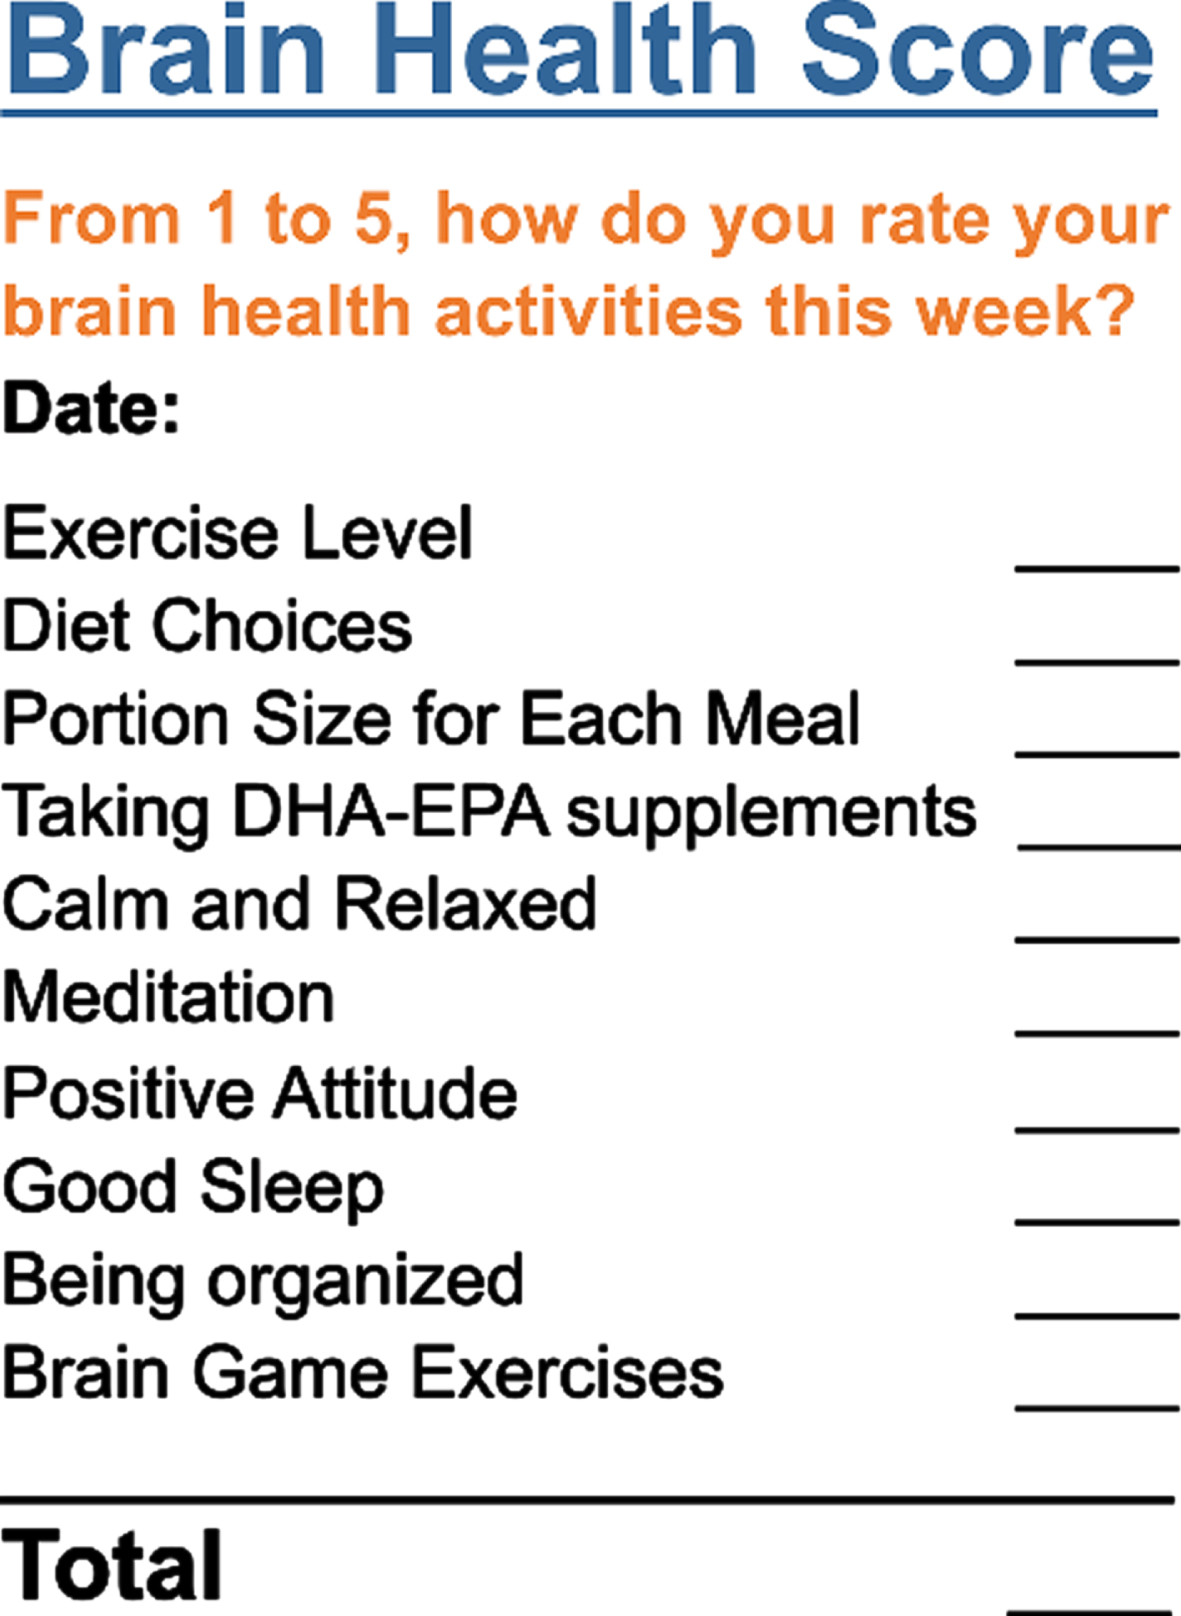 Brain coaching and the Brain Health Score. Brain coaches closely monitor the progress of each patient toward their individual goals for better fitness, better sleep, lower stress, healthier diet, meditation, brain exercises, and having a positive attitude. During each brain coaching session, brain coaches discuss the patient’s self-reported Brain Health Score for the previous week, which marks the degree of progress made toward these goals. Brain coaches act as enthusiastic cheerleaders when patients succeed in meeting goals and as encouraging accountability partners when patients fall short.